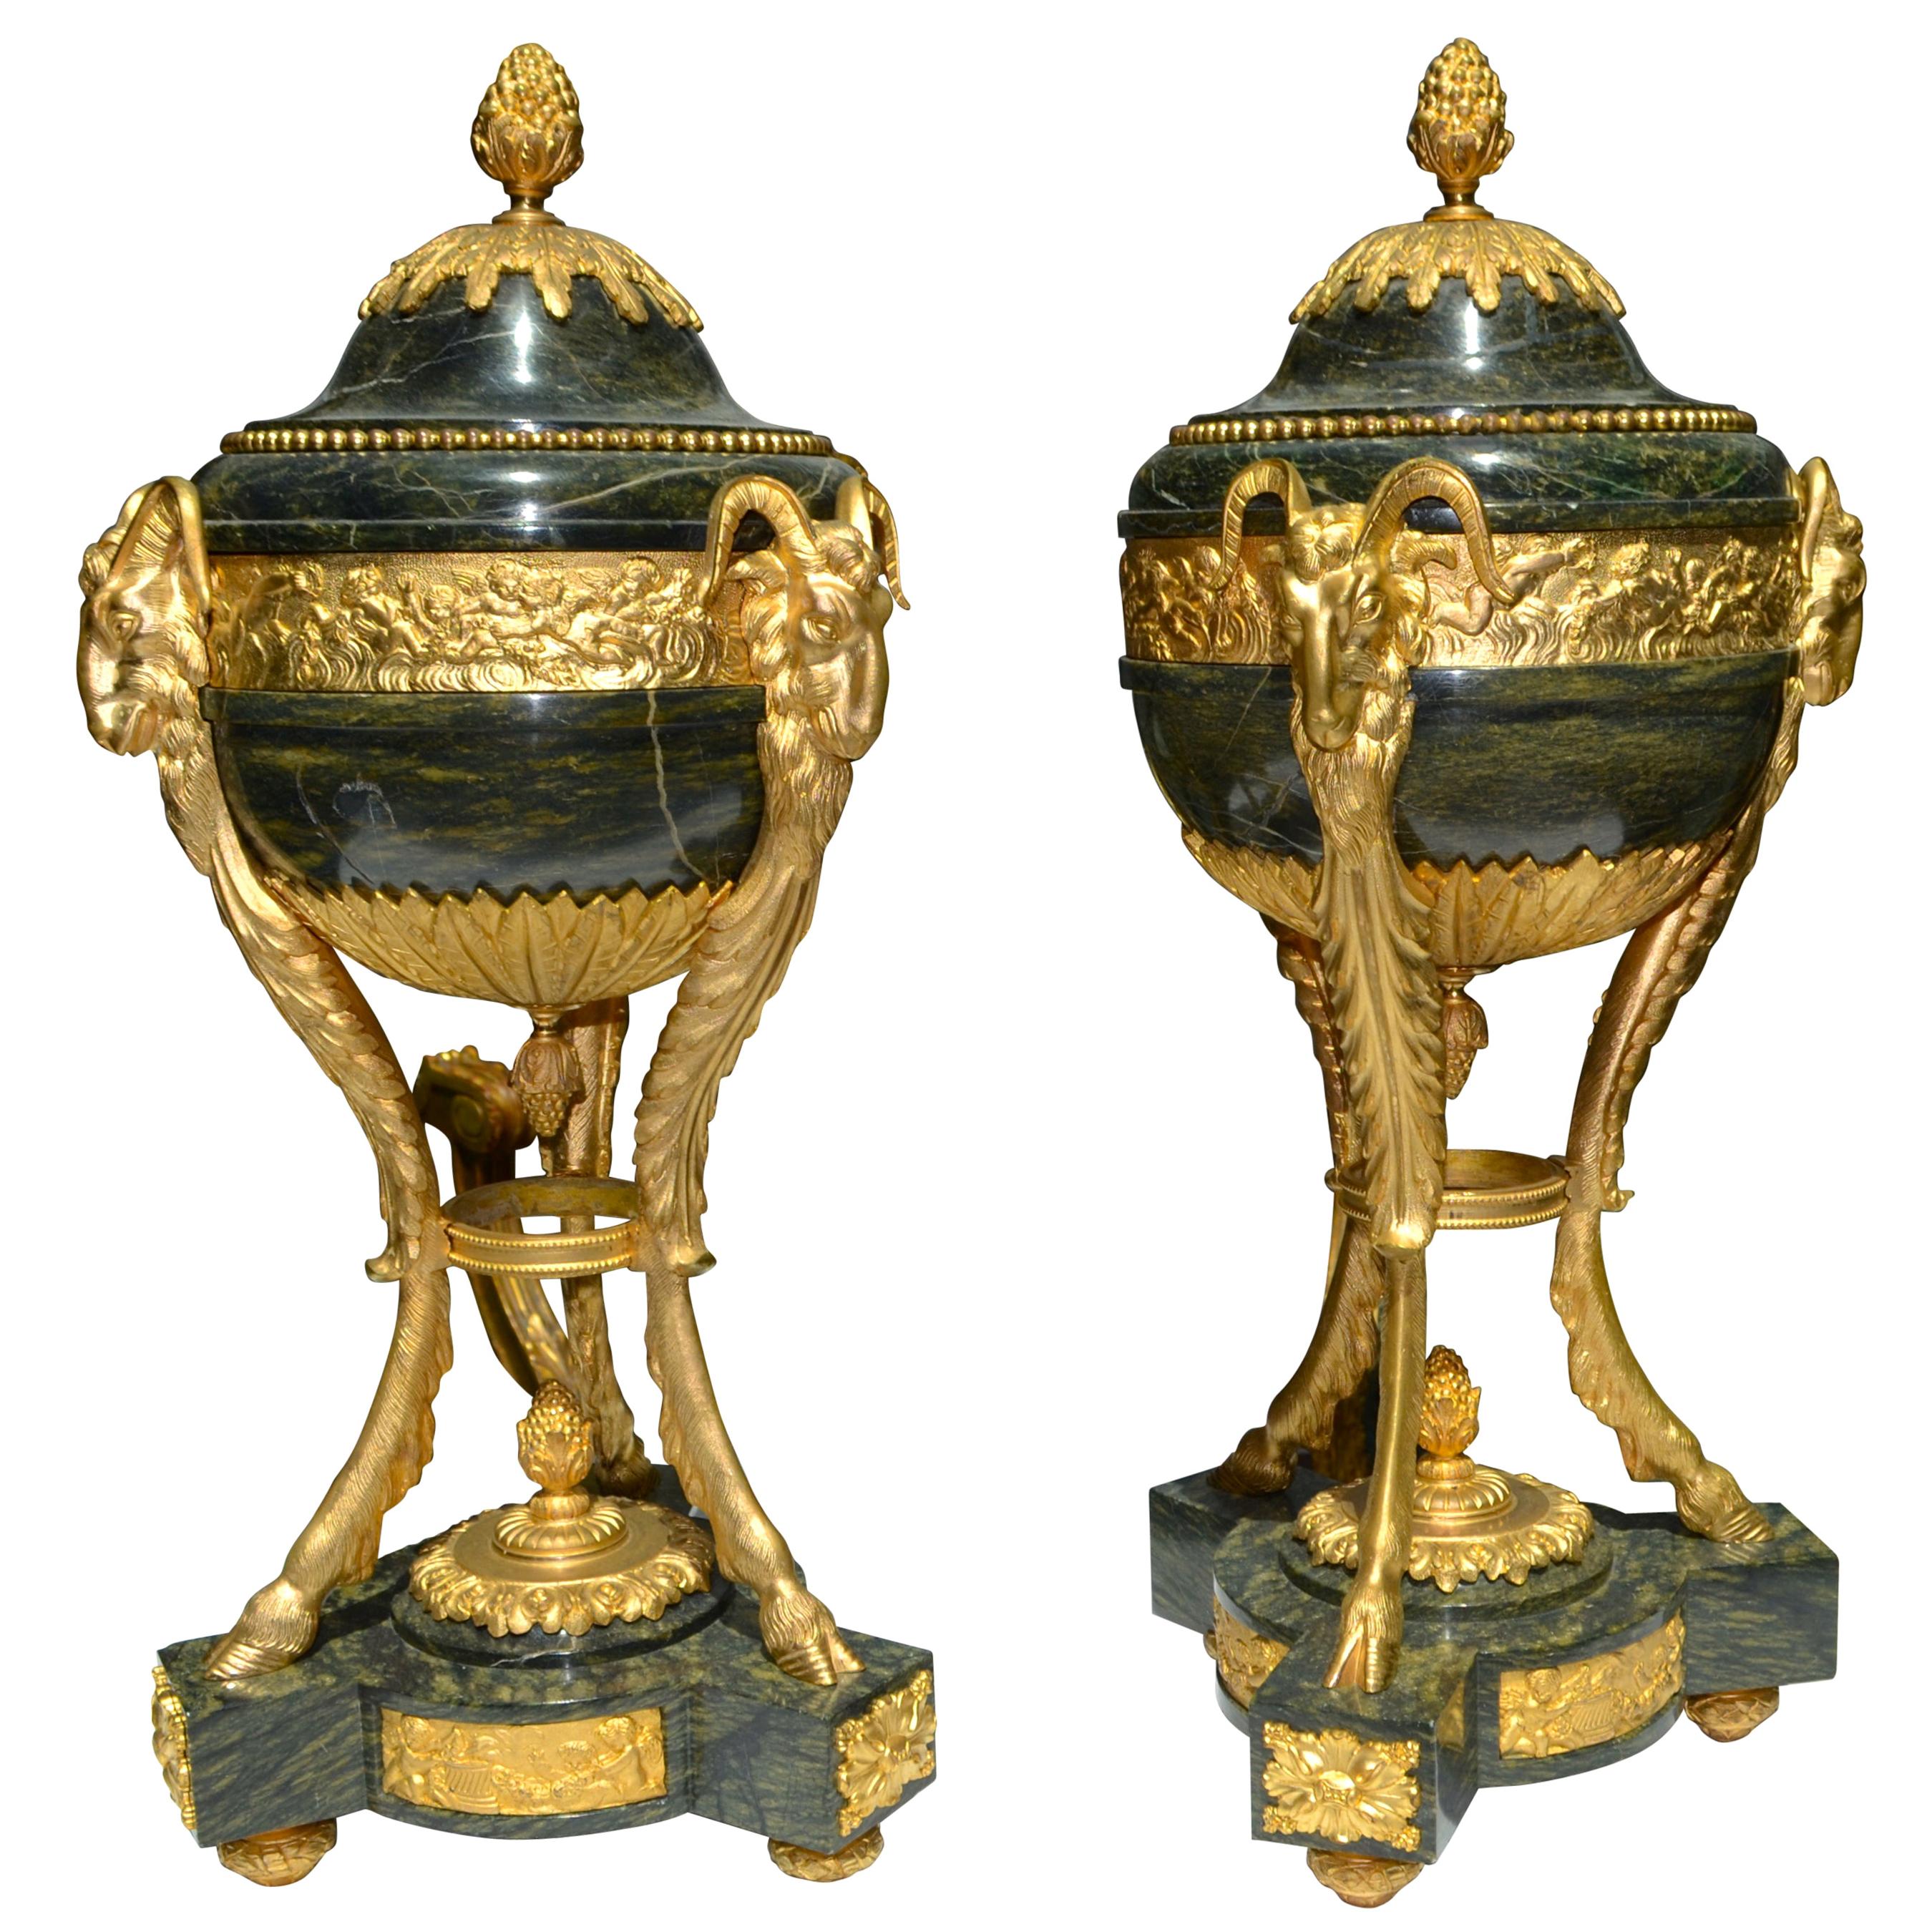 Pair of Louis XVI Style Verde Antico Marble and Gilt Bronze Lidded Cassolettes